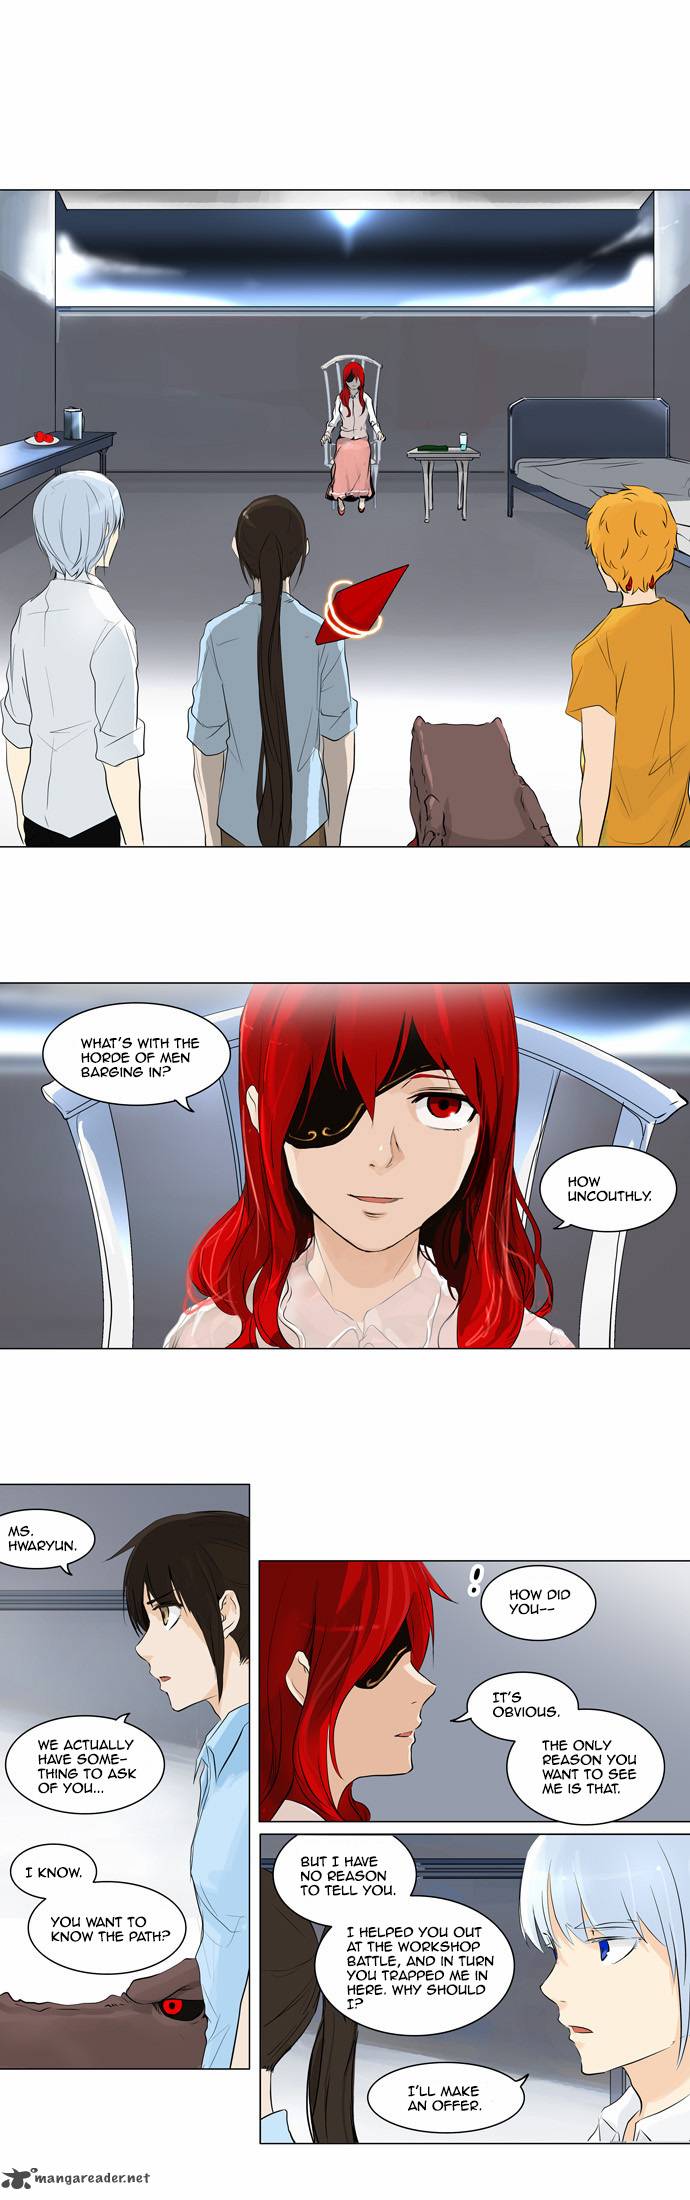 Tower Of God 190 17